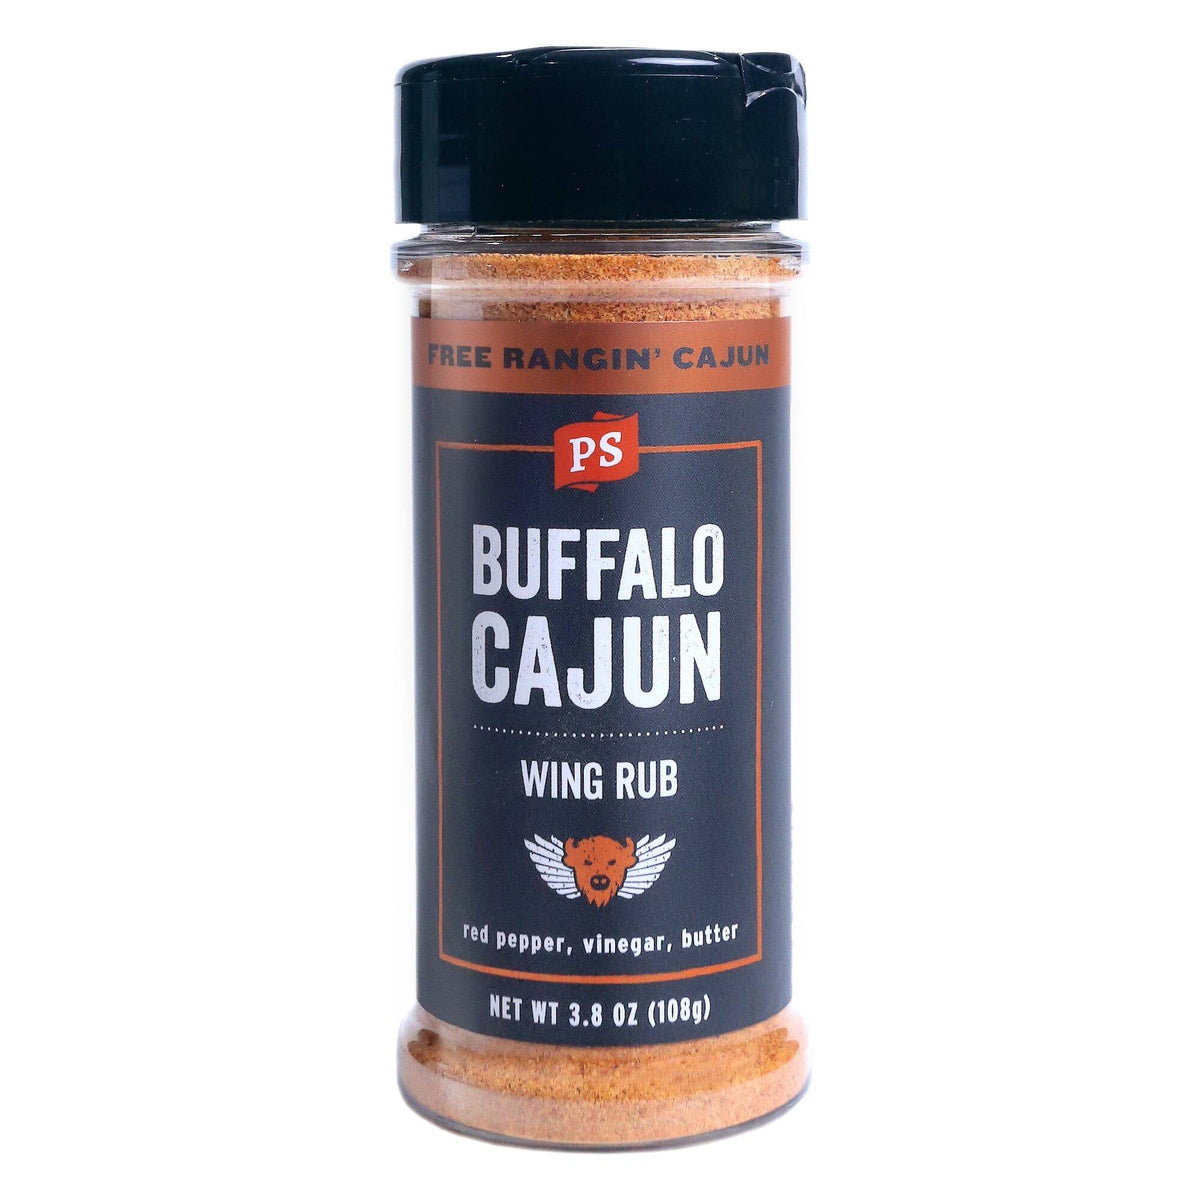 Fire Up Your Taste Buds with Hot & Spicy Cajun Style